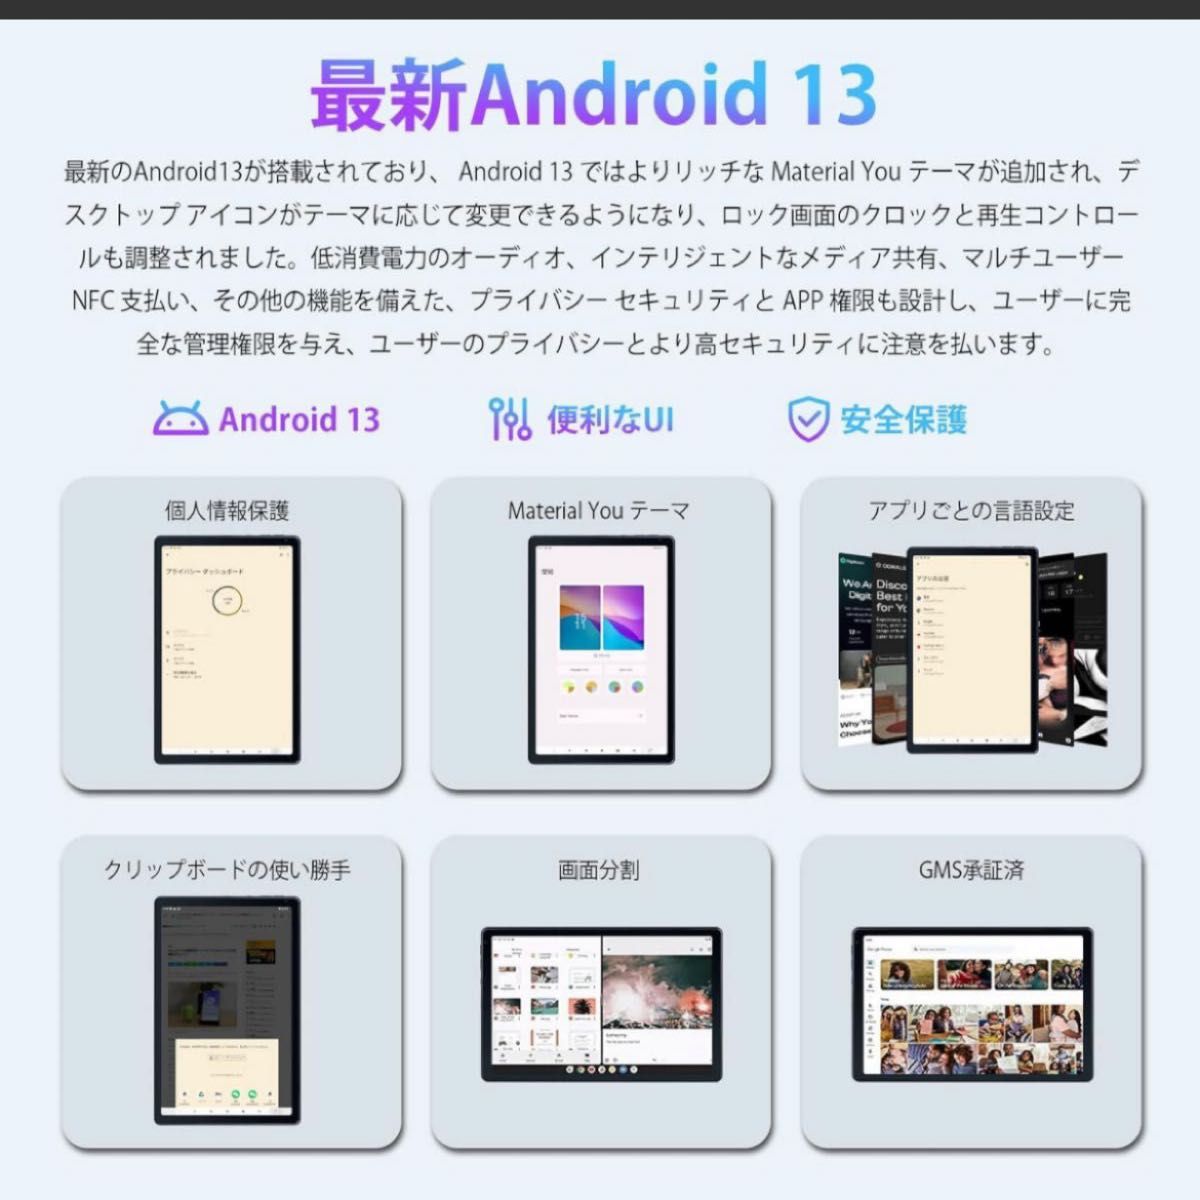 Android 13 タブレット オクタコア Android タブレット｜Yahoo!フリマ